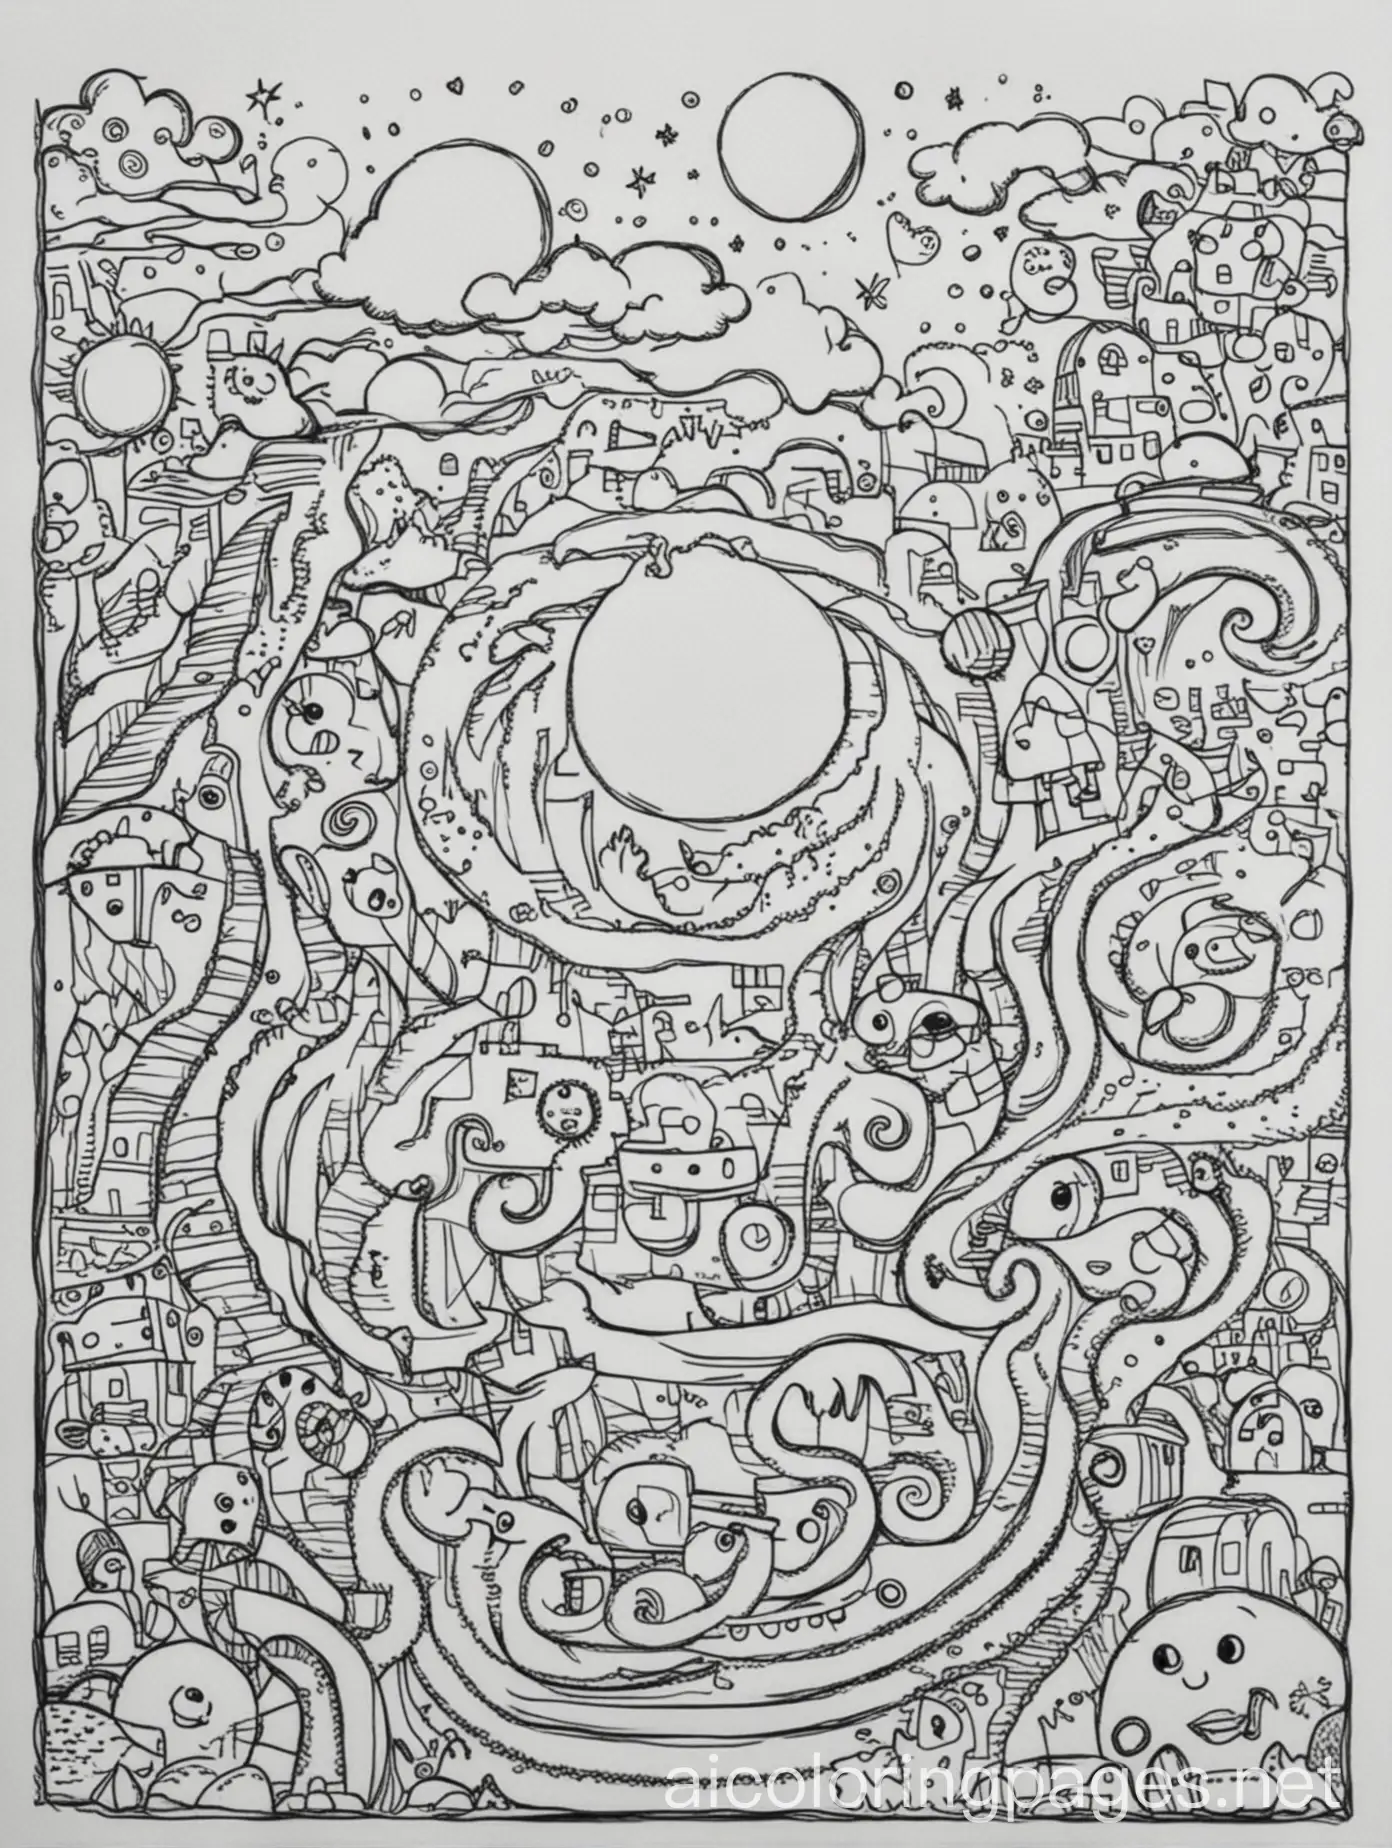 doodles, Coloring Page, black and white, line art, white background, Simplicity, Ample White Space. The background of the coloring page is plain white to make it easy for young children to color within the lines. The outlines of all the subjects are easy to distinguish, making it simple for kids to color without too much difficulty